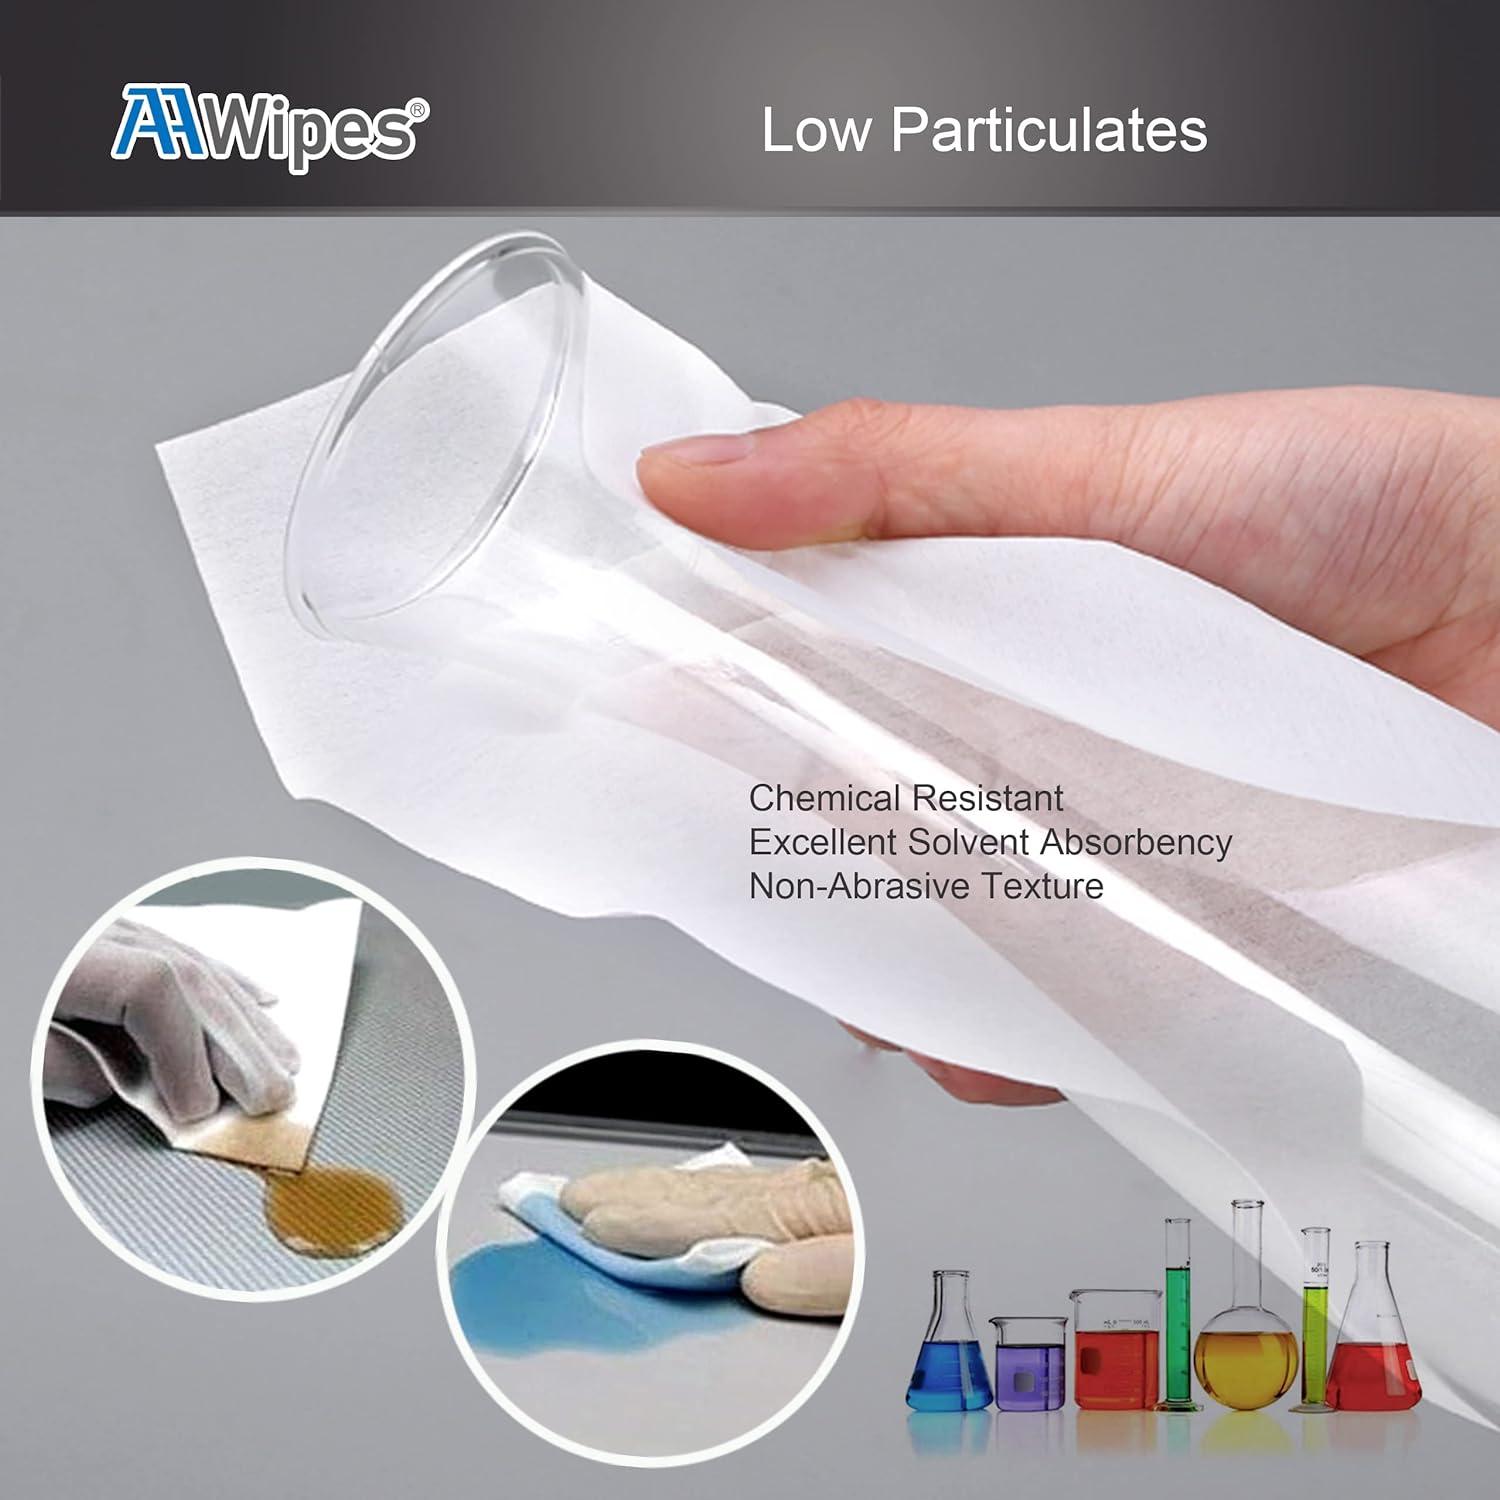 Pharmaceutical Cleanroom Wipes 12"x12" Cellulose/Polyester Heavy Duty Nonwoven Wiping Cloth for Lab, Electronics, Printing and Semiconductor Industries. 3,000 wipes/box in 20 bags (No. NW06812).